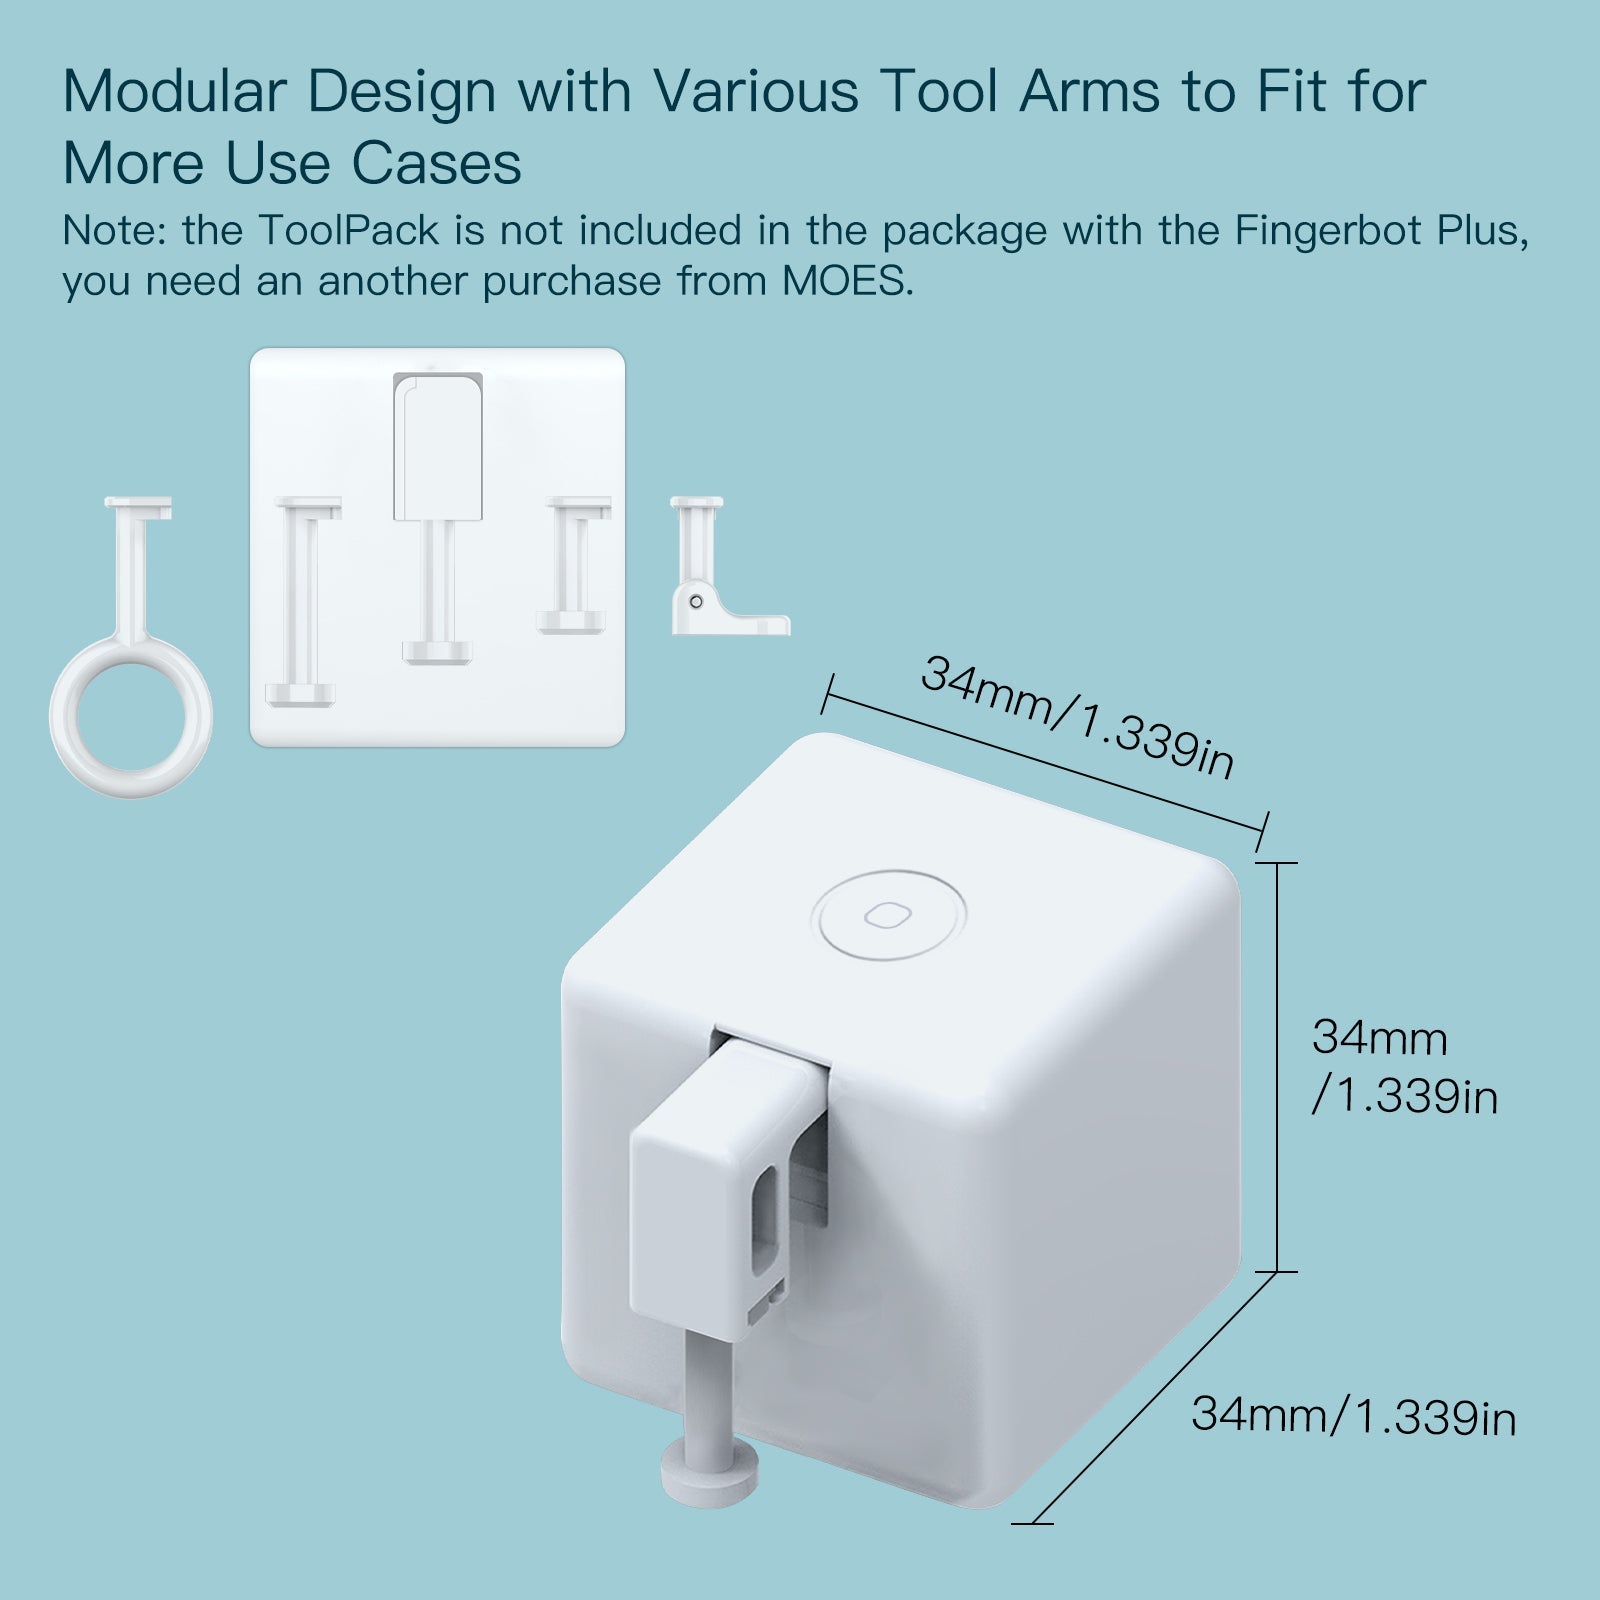 Modular Design with Various Tool Arms to Fit for More Use Cases - MOES